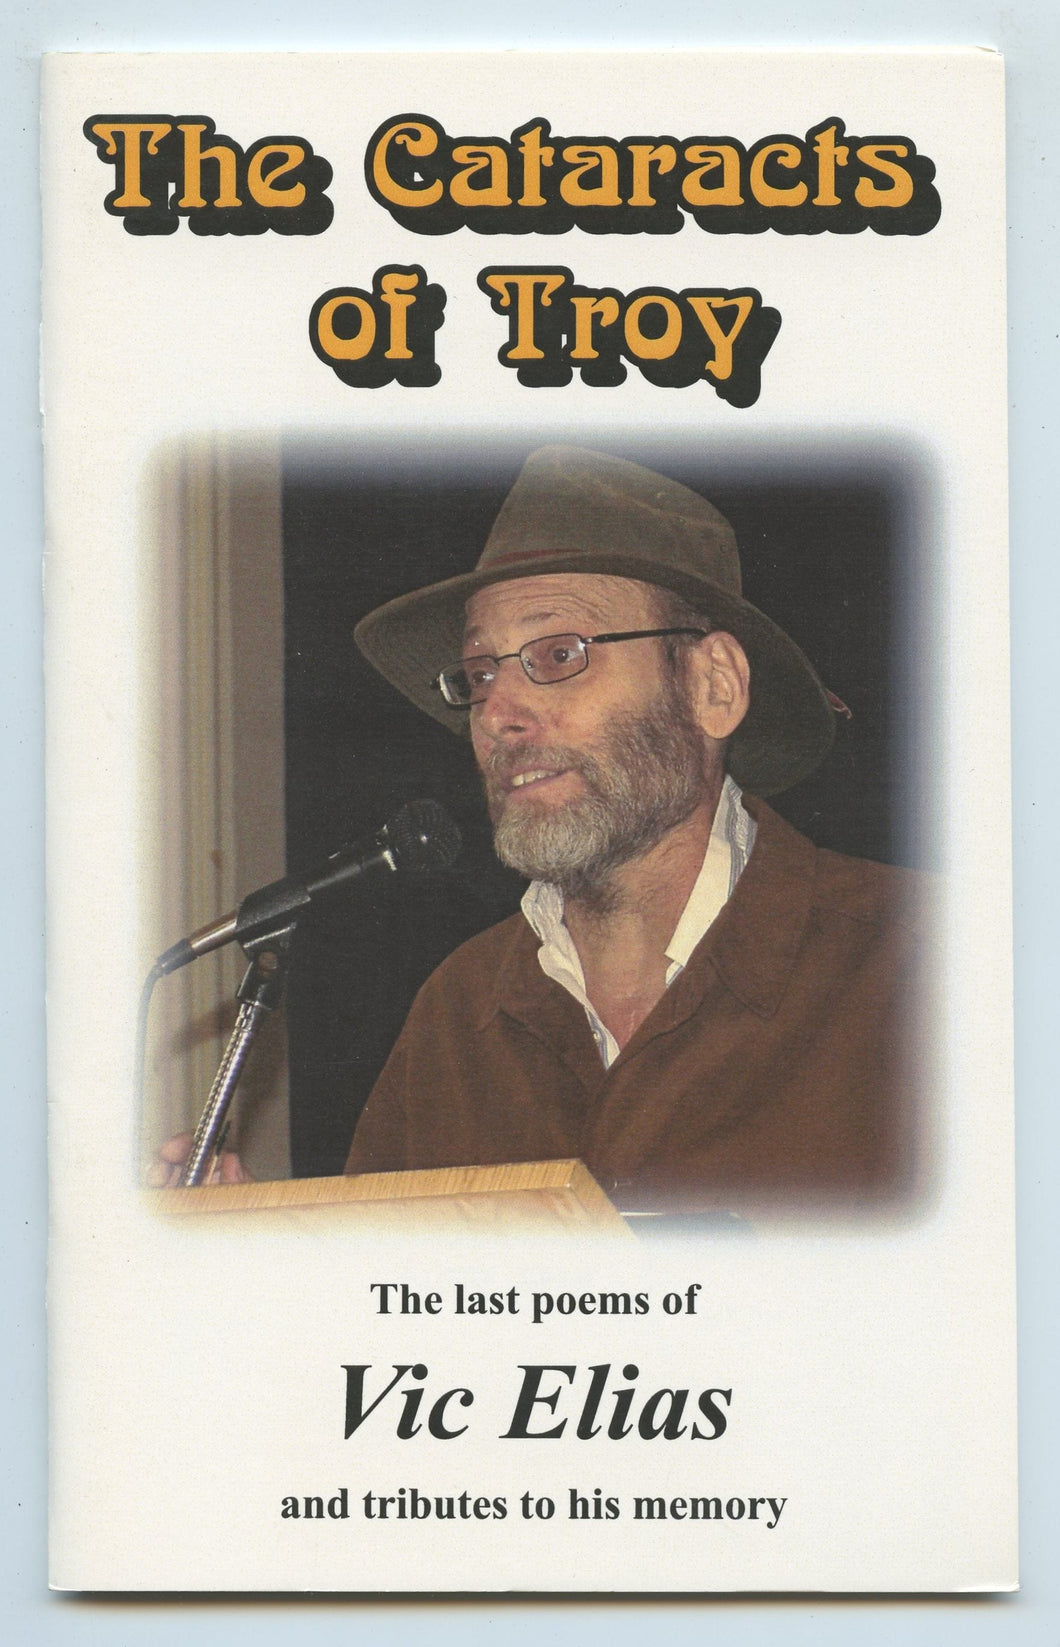 The Cataracts of Troy: The last poems of Vic Elias and tributes to his memory